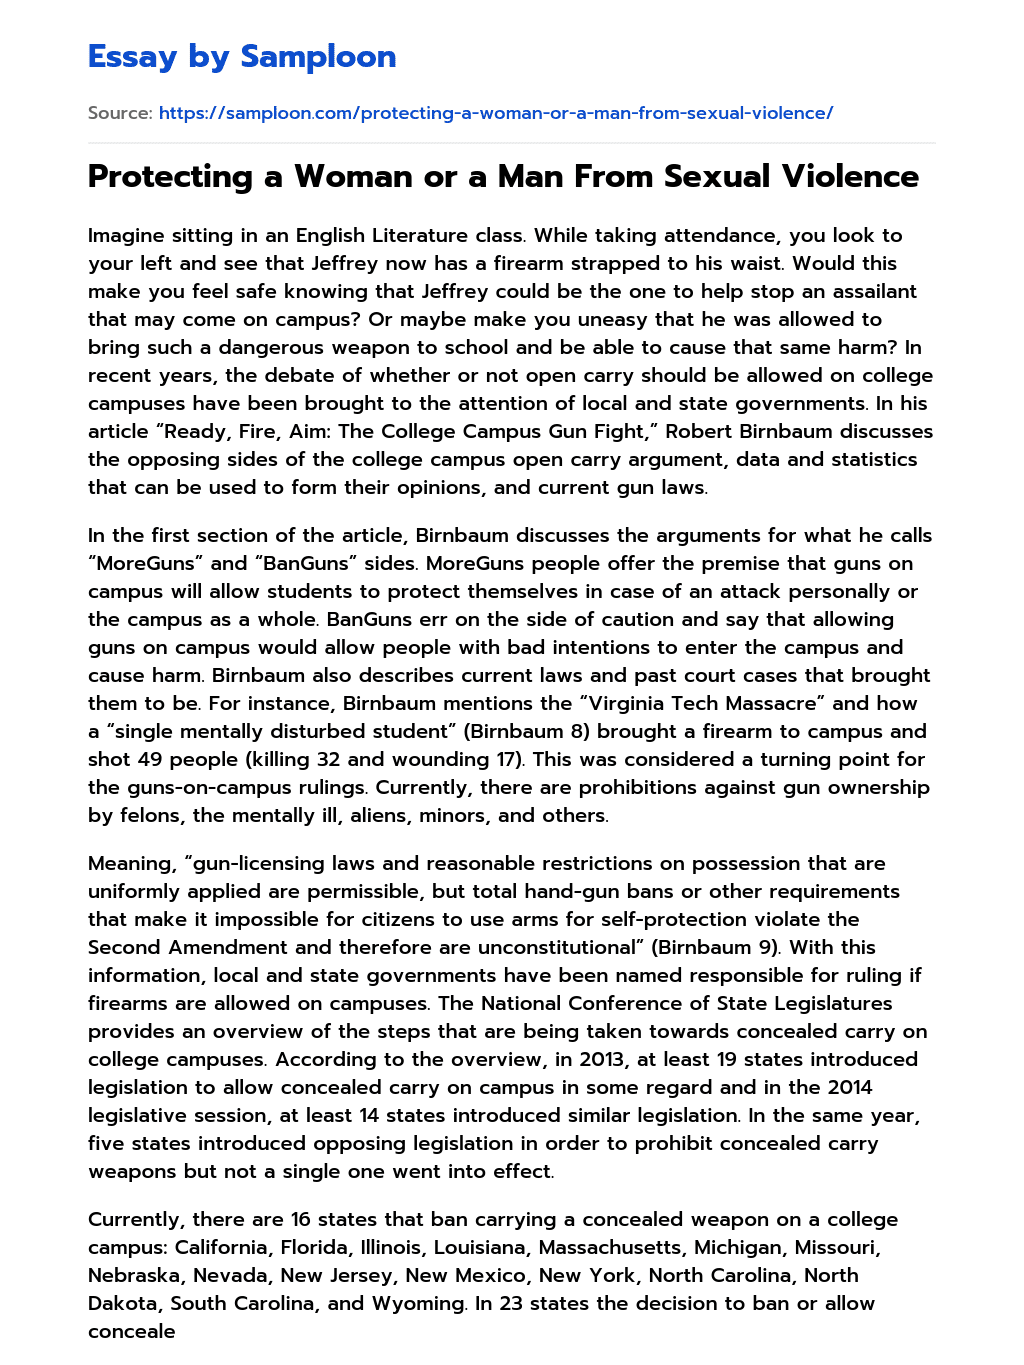 Protecting a Woman or a Man From Sexual Violence essay